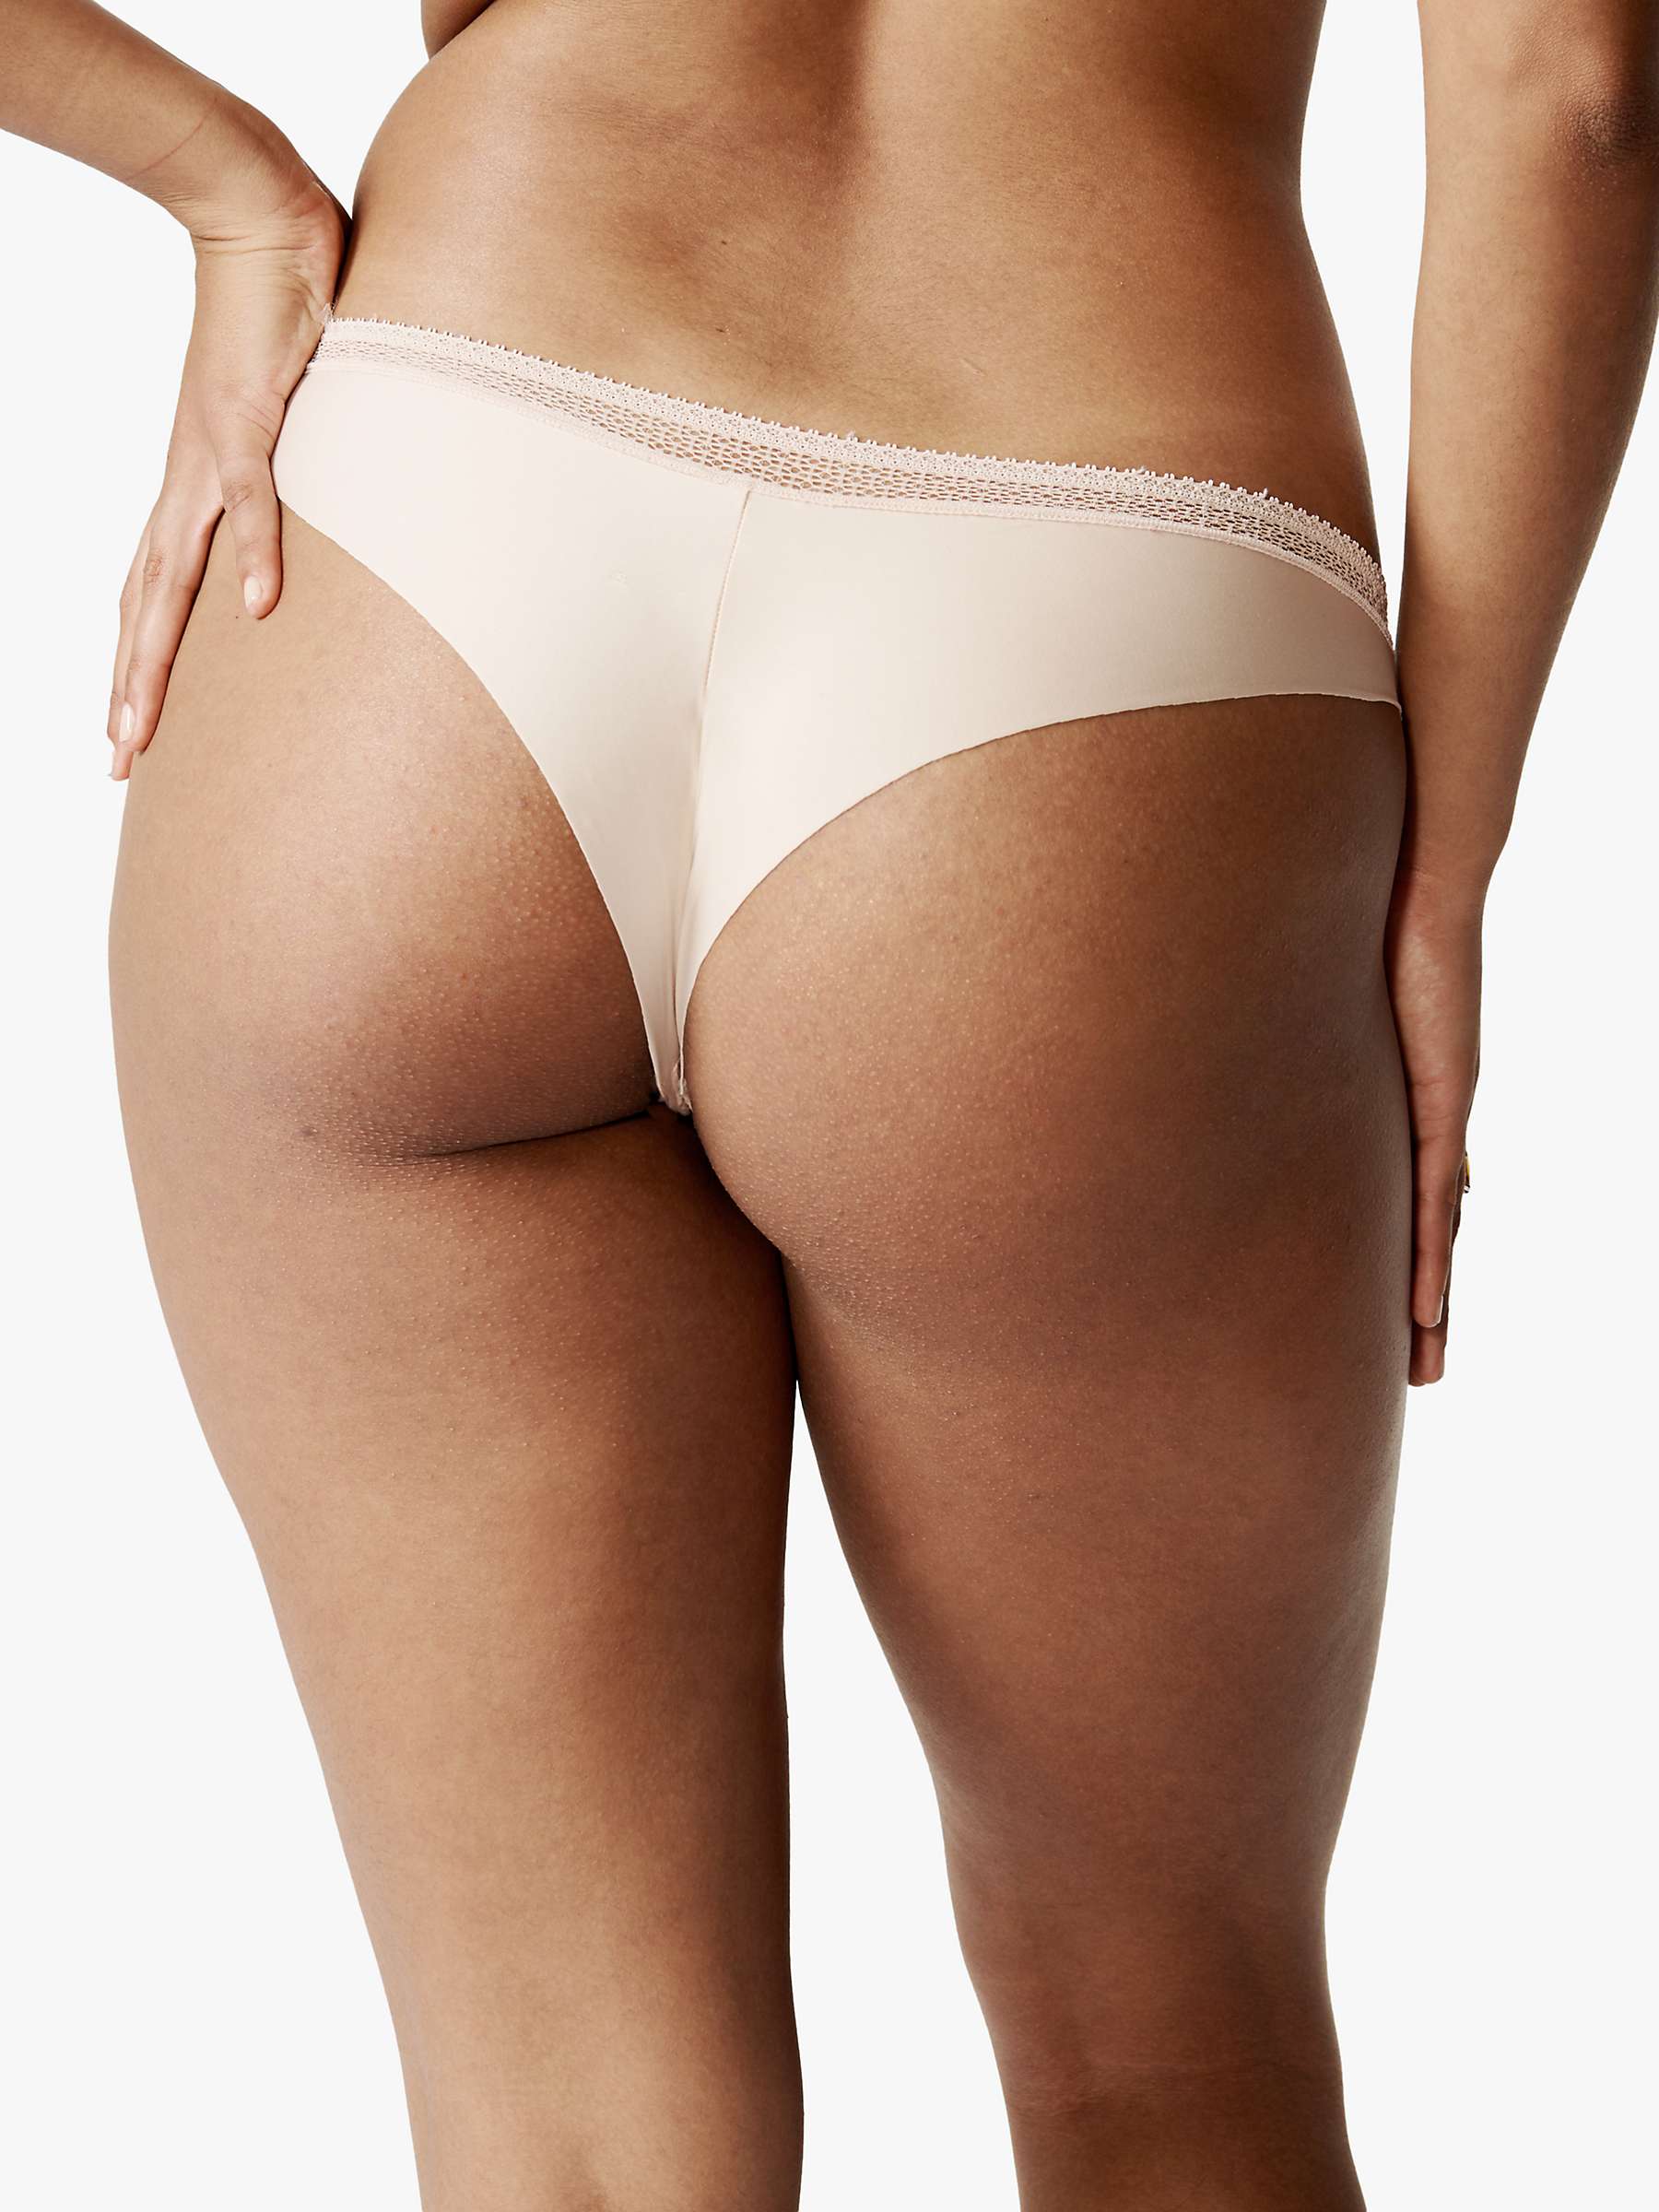 Buy Passionata Dream Today Tanga Knickers Online at johnlewis.com